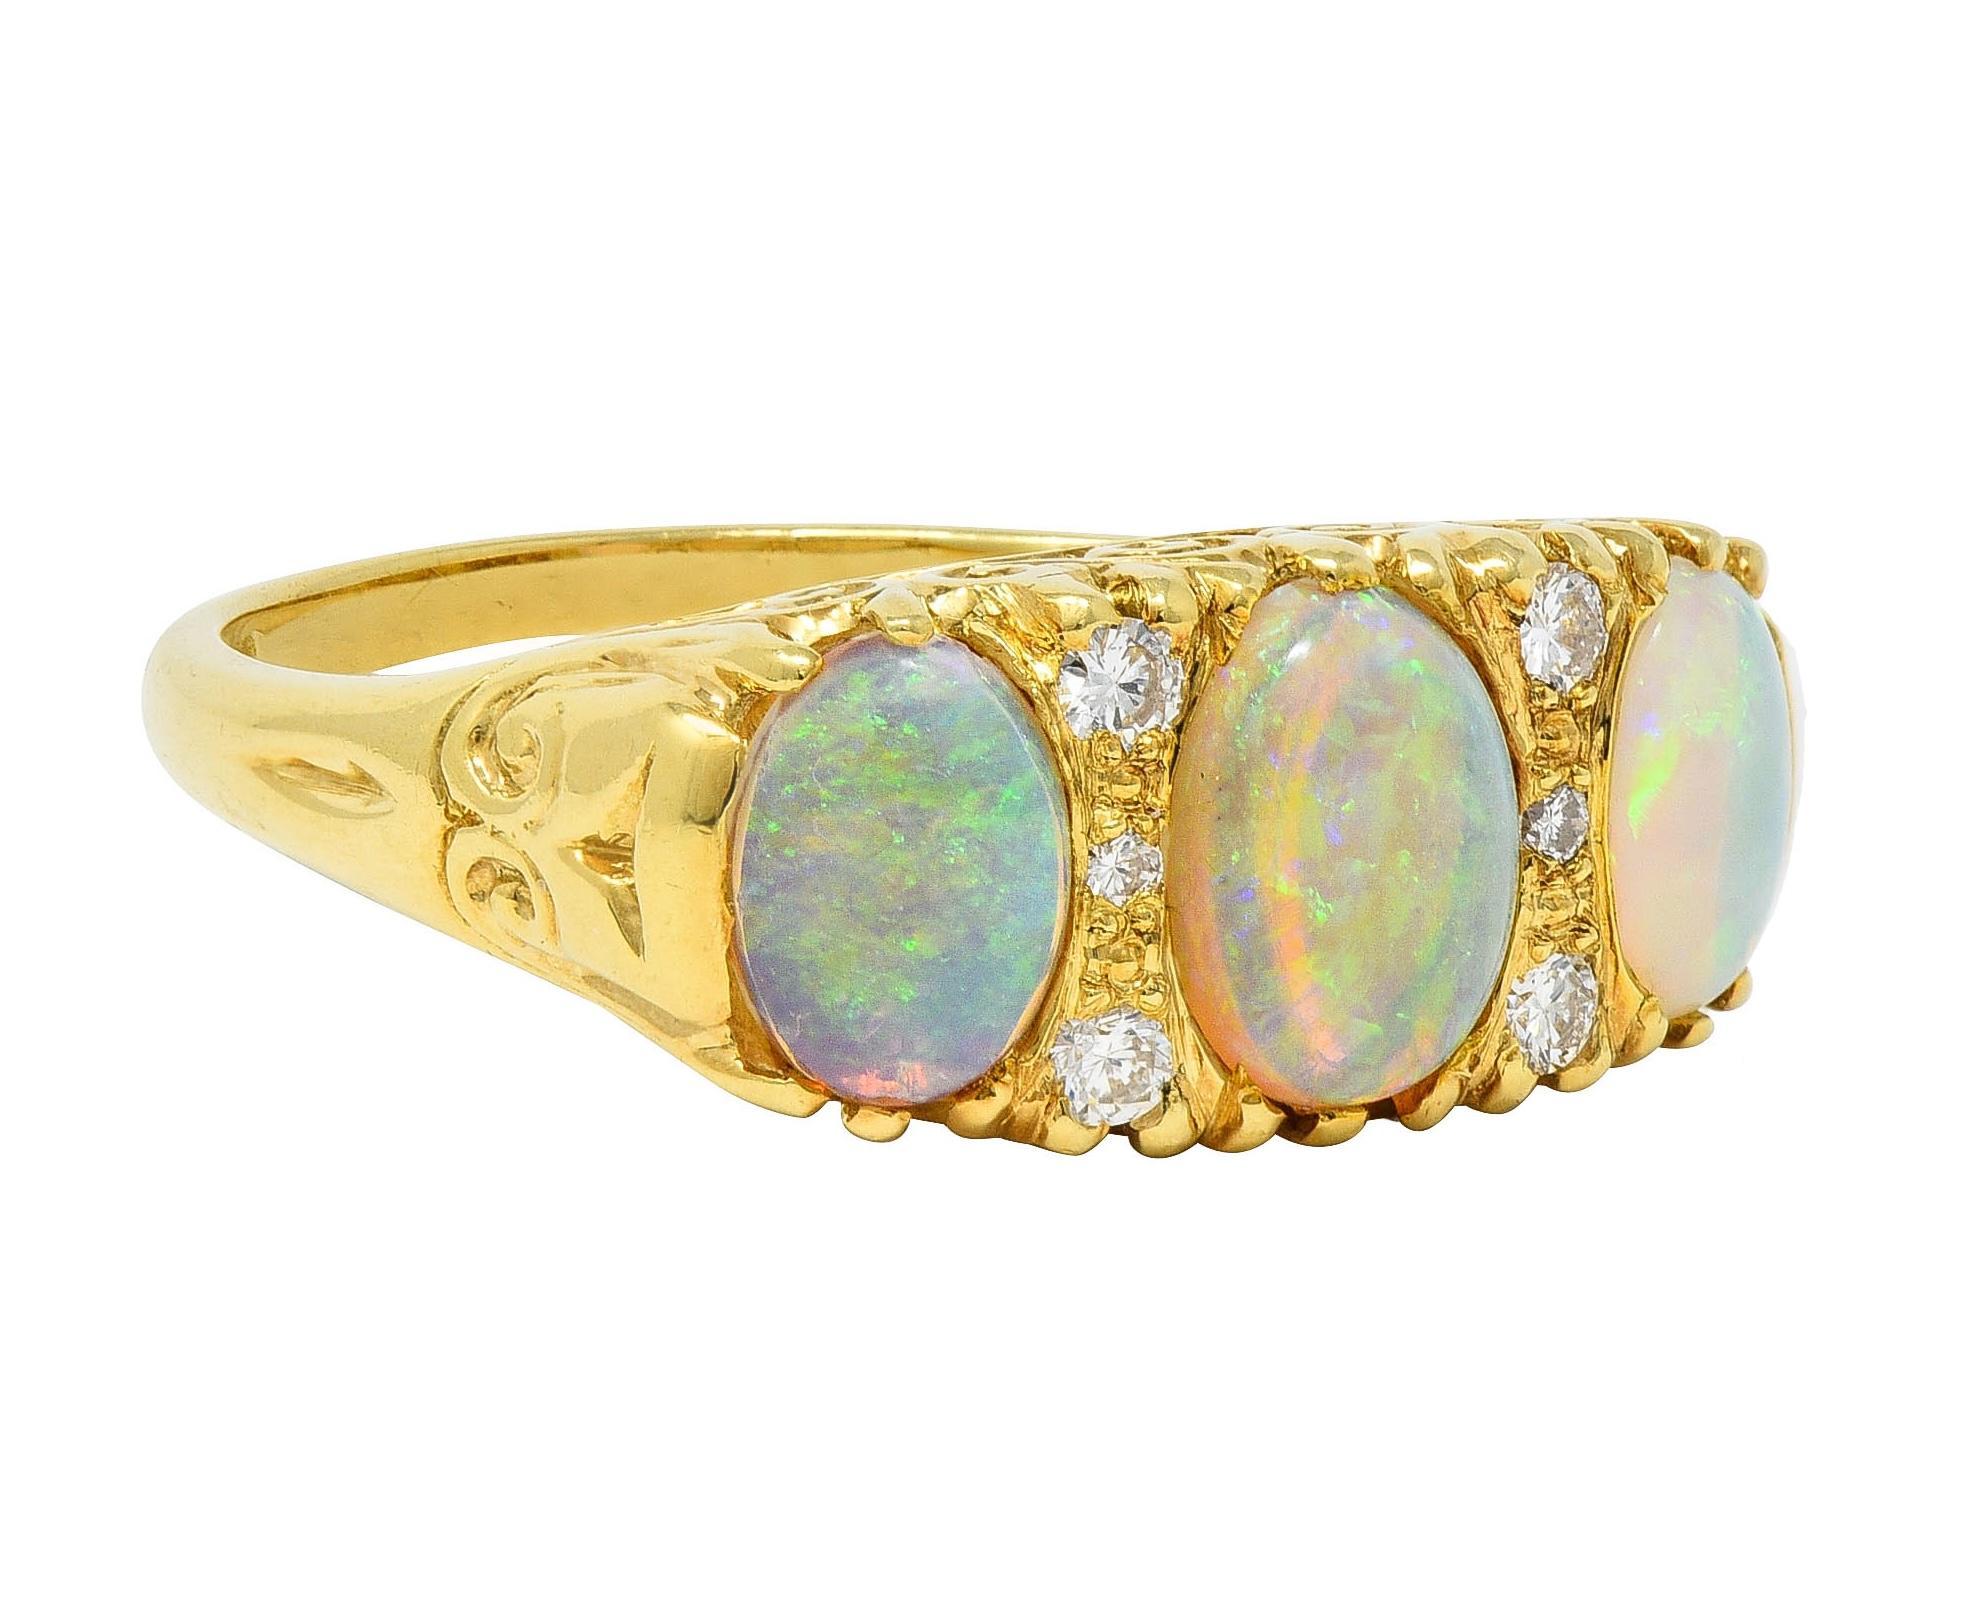 Featuring three oval shaped opal cabochons prong set east to west 
Graduated and ranging in size from 5.0 x 7.0 mm to 6.0 x 9.0 mm 
Translucent white in body color with strong blue and green play-of-color
Accented by round brilliant cut diamonds